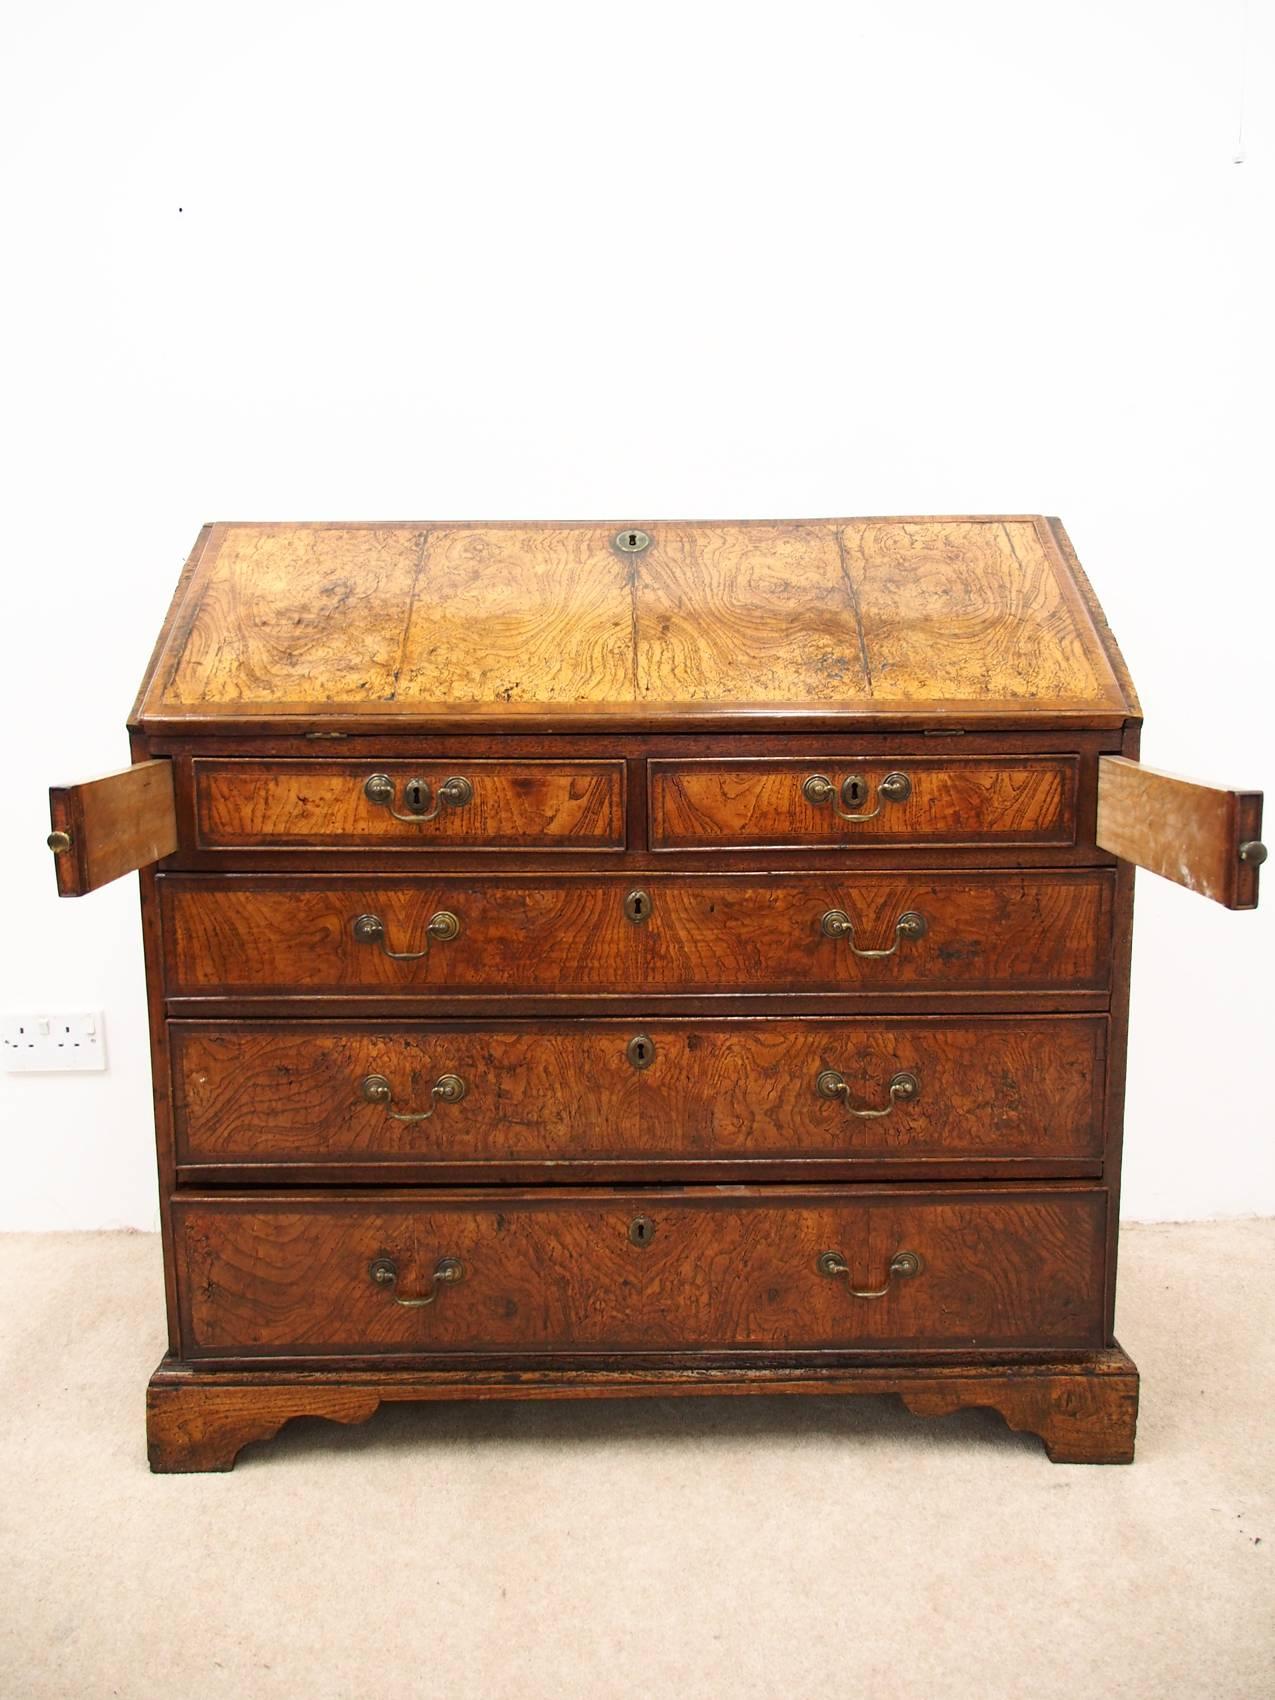 Unusual George III elm bureau, circa 1770. The piece has a beautifully figured elm top with parquetry and cross-banding. It has two smaller drawers, above three larger drawers with brass clip handles. It stands on bracket feet. Beautiful color and